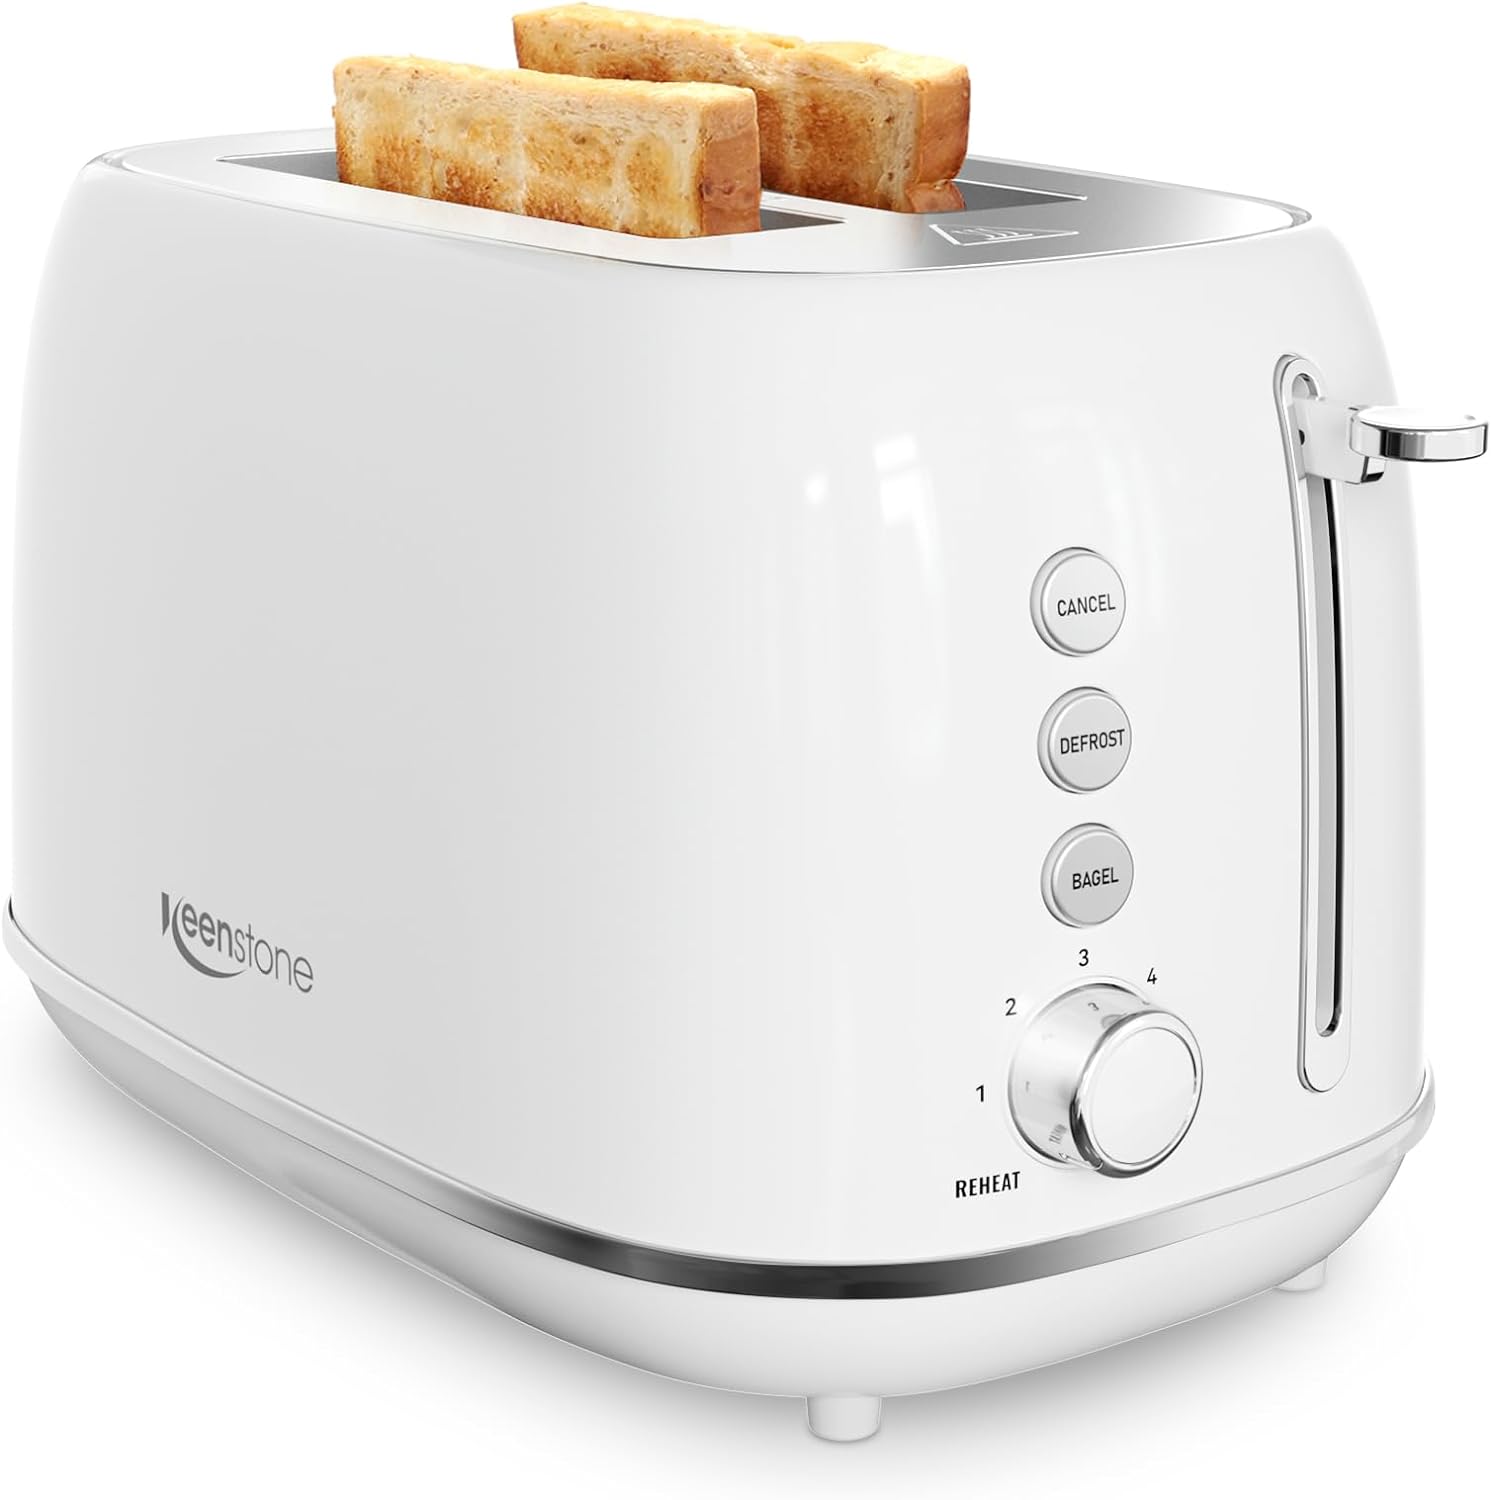 Read more about the article 2 Slice Stainless Steel Toaster Retro with 6 Bread Shade Settings, Bagel, Cancel, Defrost Function for ONLY $33.14 (Was $49.99)